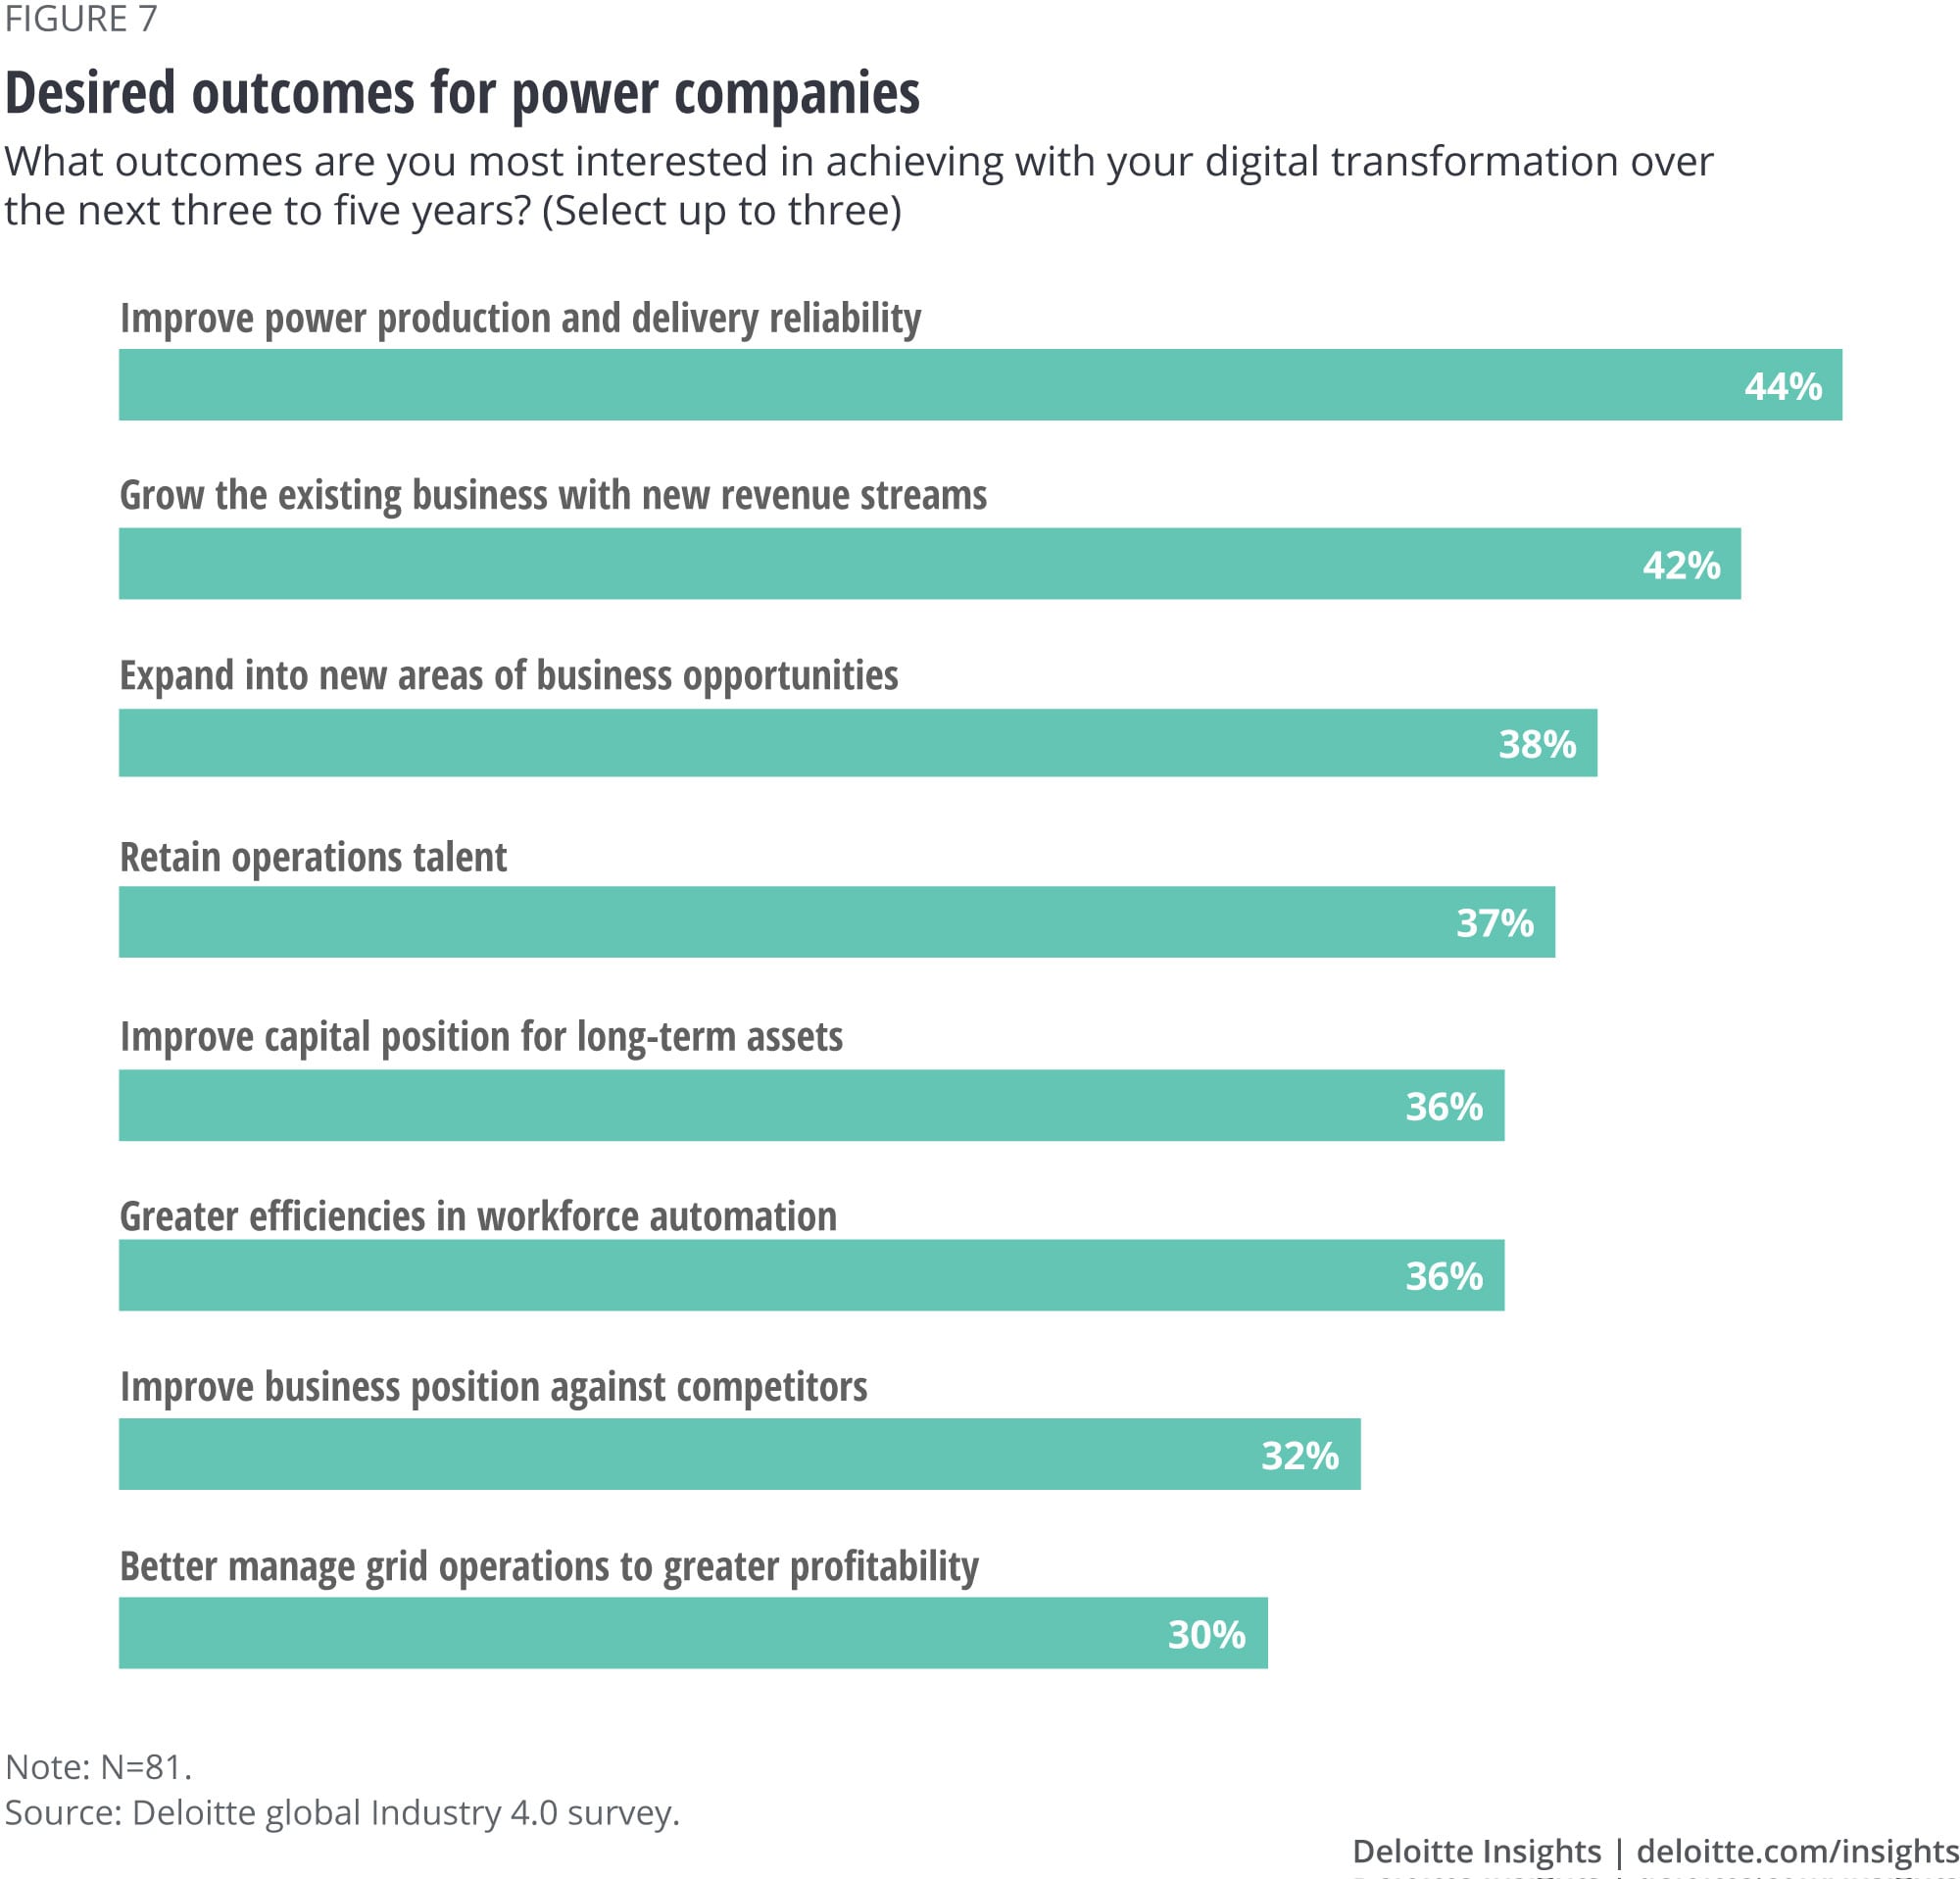 Desired outcomes for power companies